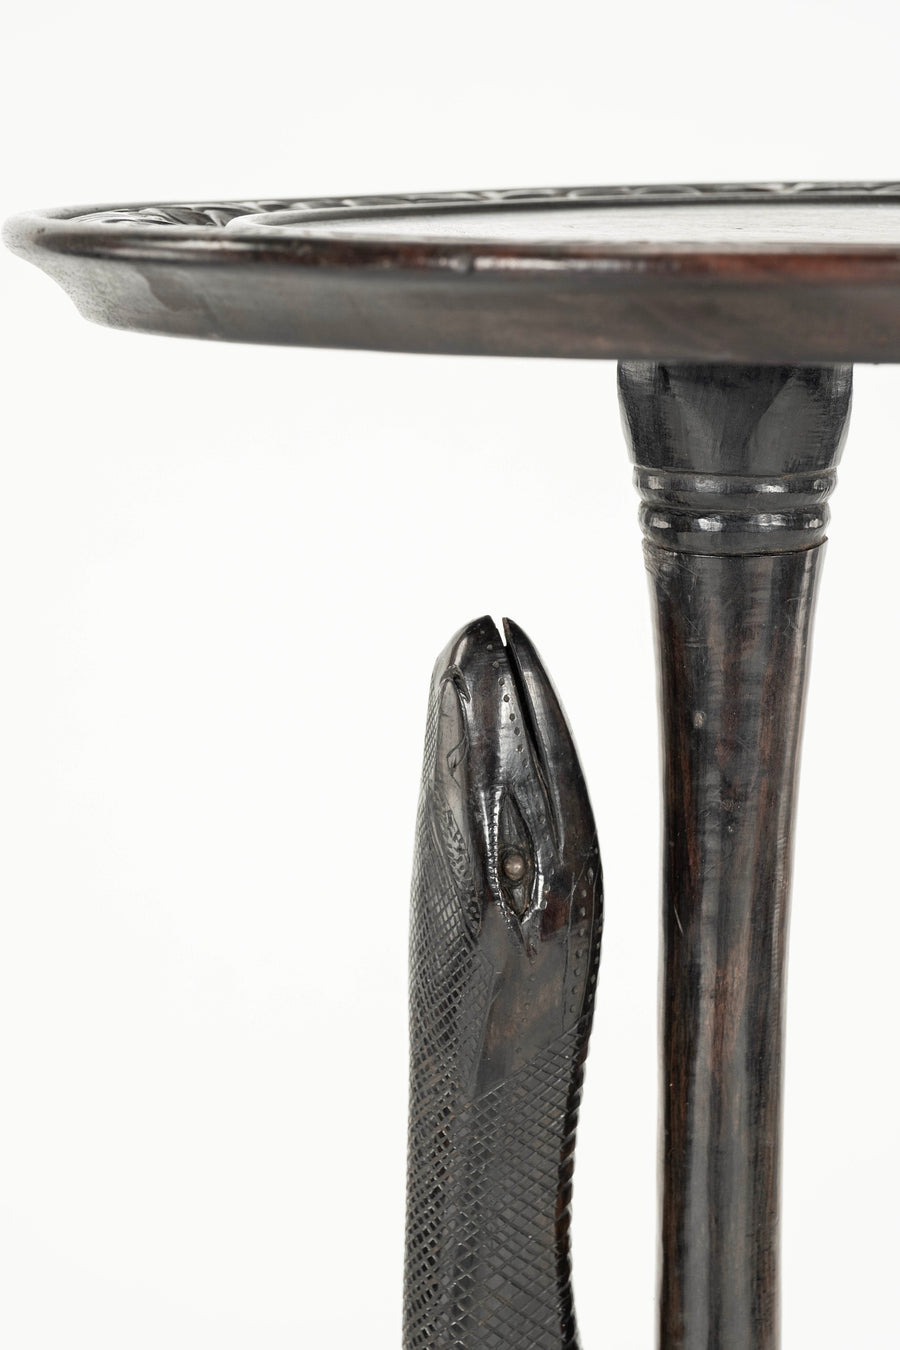 19th Century Carved Snake Serpent Pedestal Table